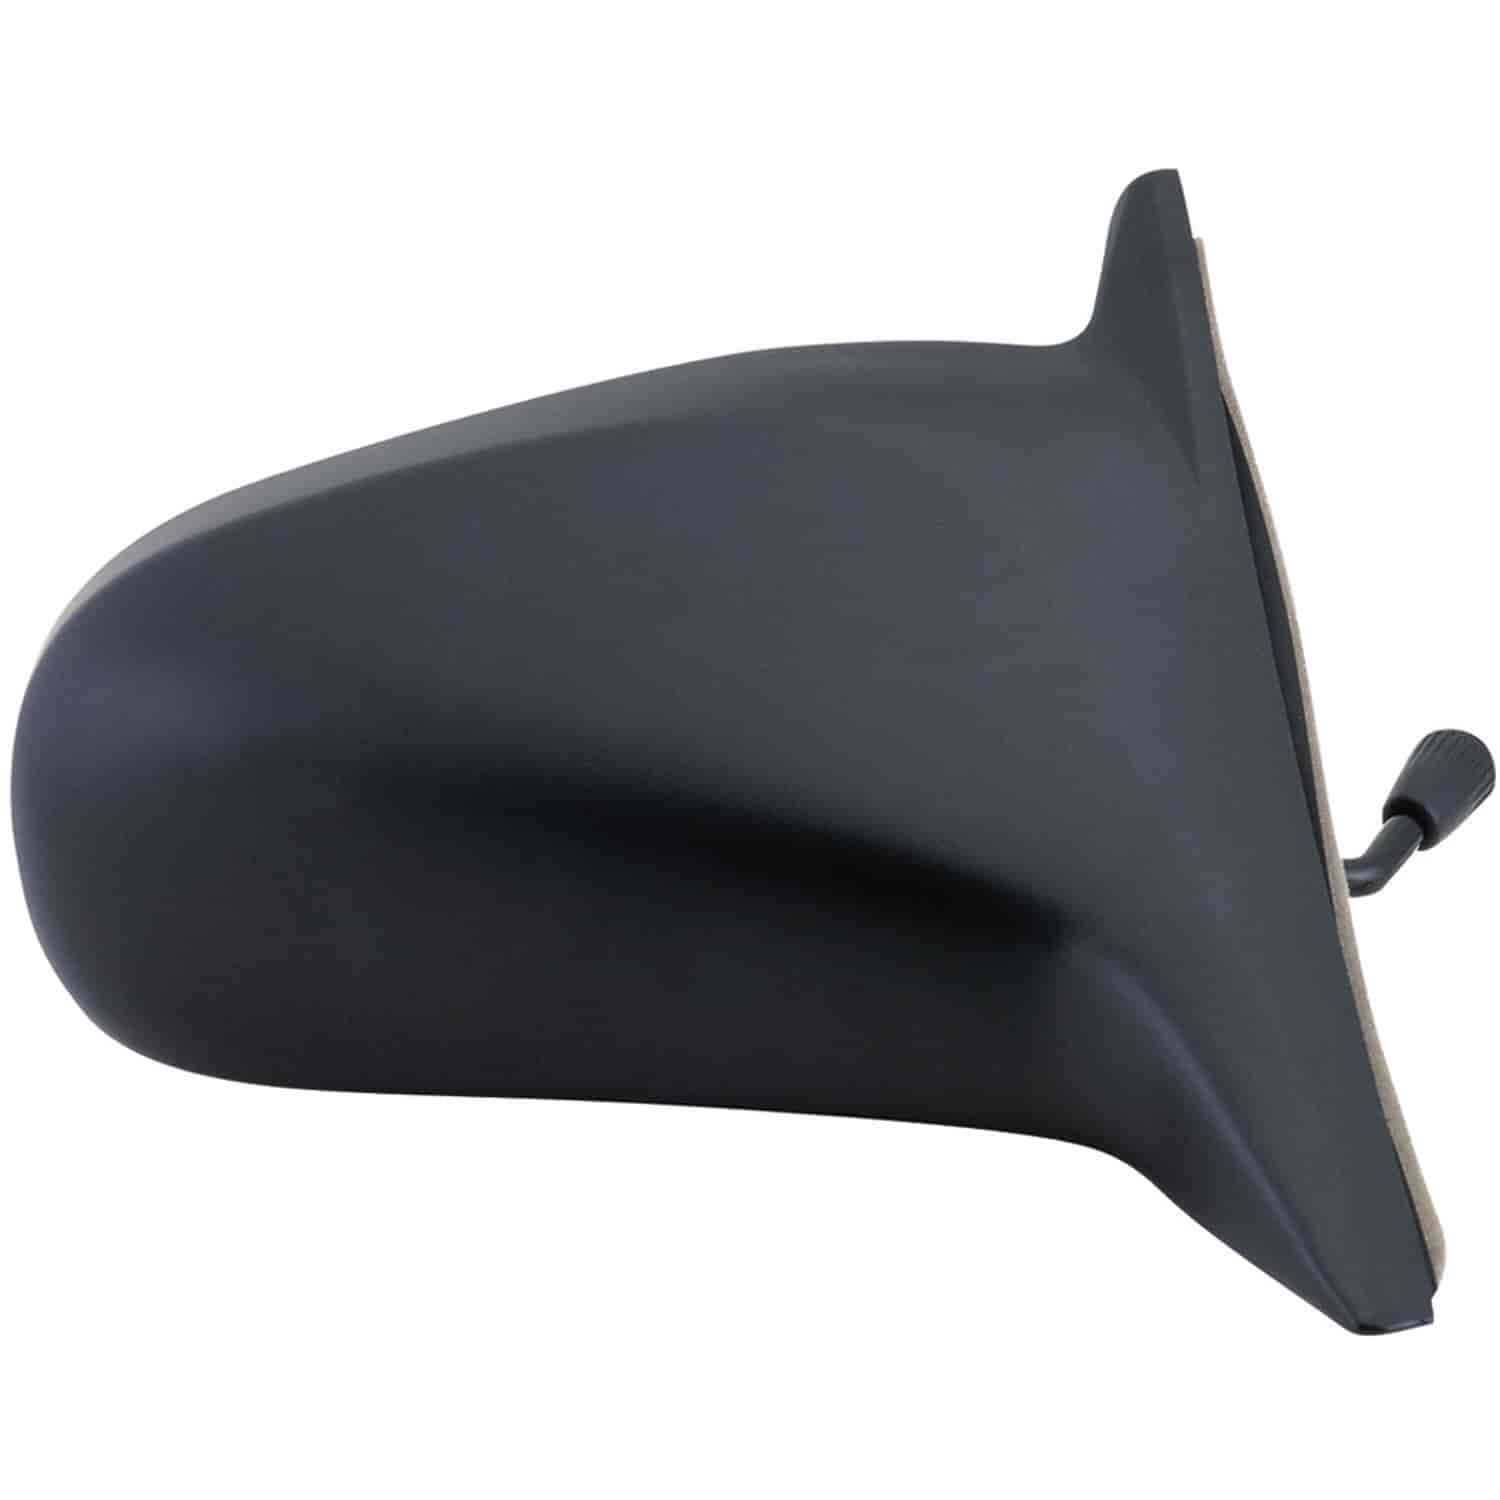 OEM Style Replacement mirror for 96-00 Honda Civic Sedan passenger side mirror tested to fit and fun